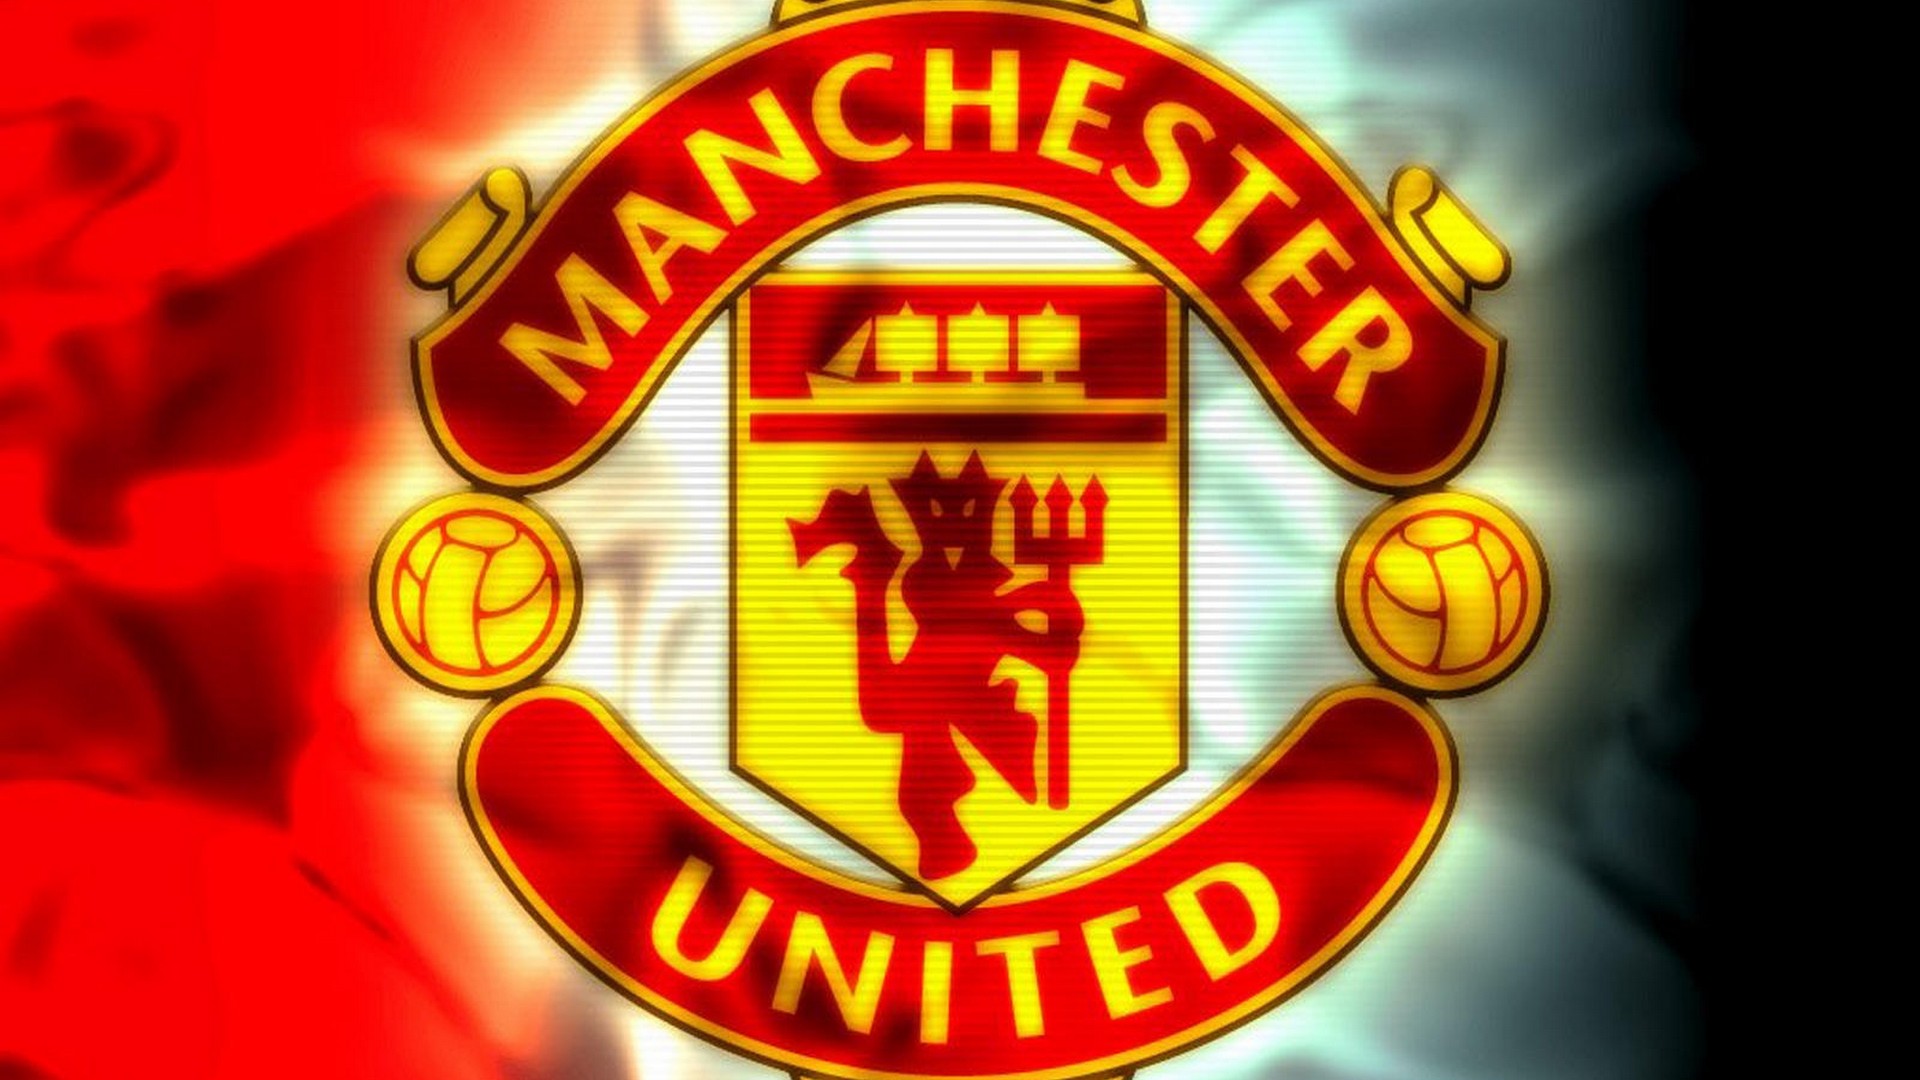 Wallpapers HD Manchester United with high-resolution 1920x1080 pixel. You can use this wallpaper for your Desktop Computers, Mac Screensavers, Windows Backgrounds, iPhone Wallpapers, Tablet or Android Lock screen and another Mobile device